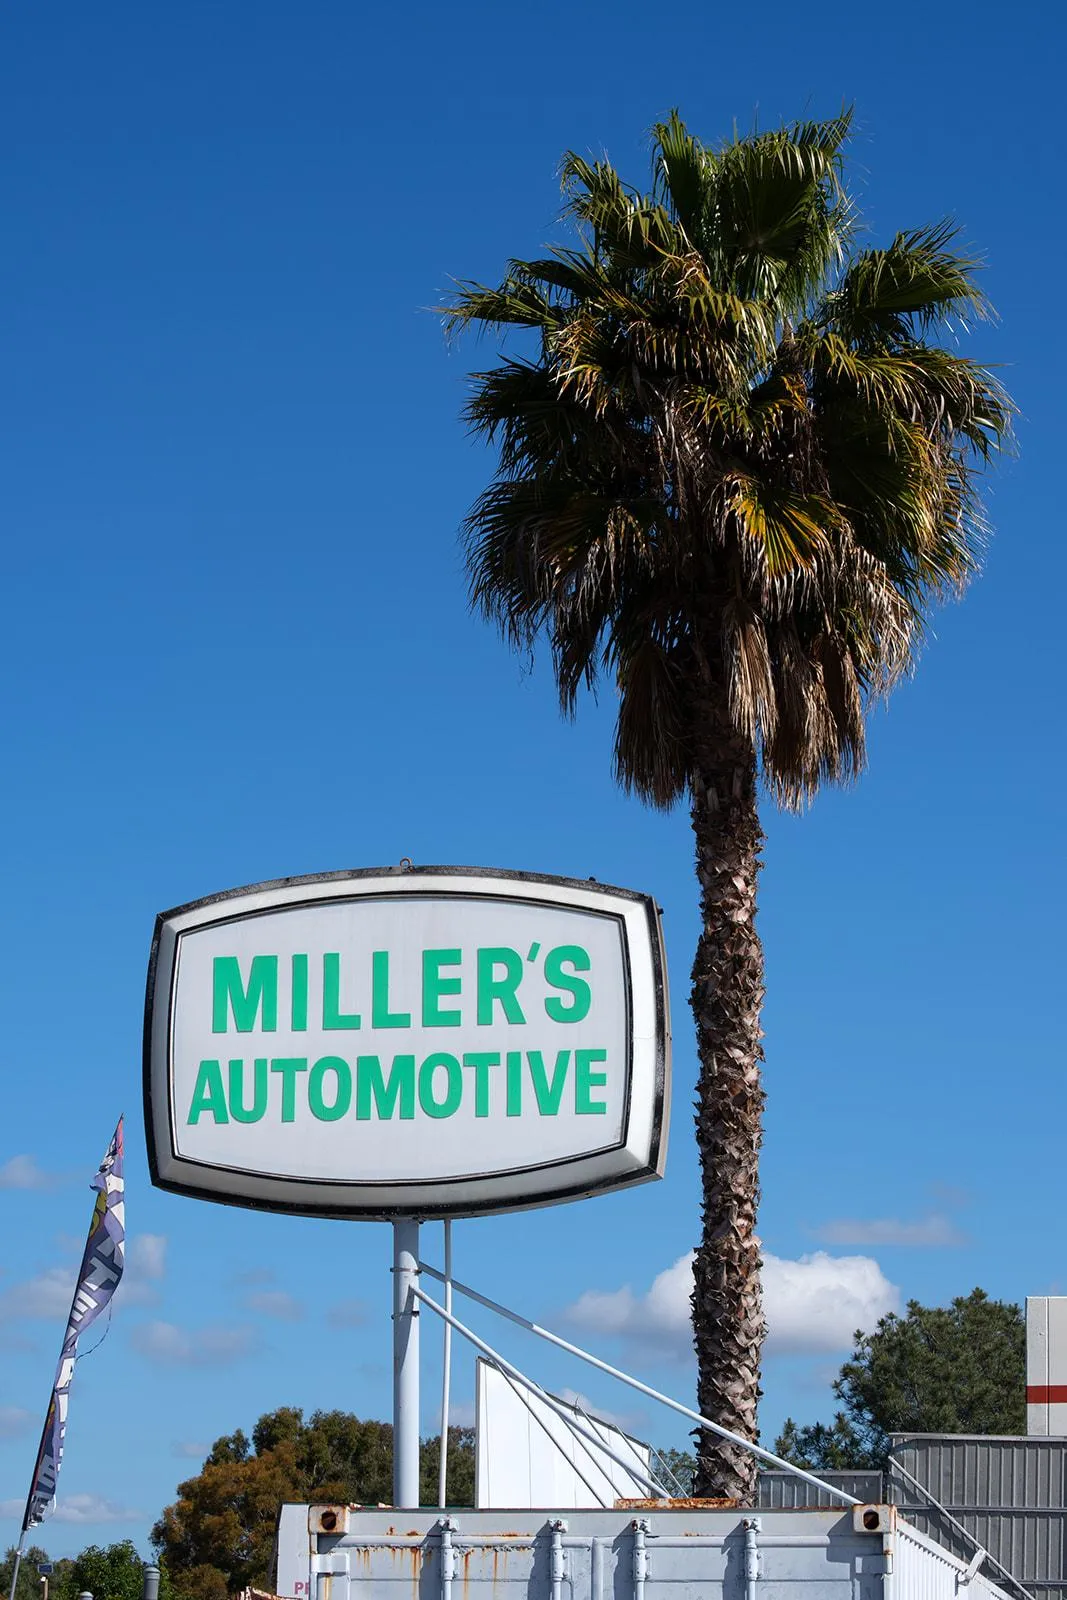  The street sign for Miller's Automotive, a Fullerton auto repair shop